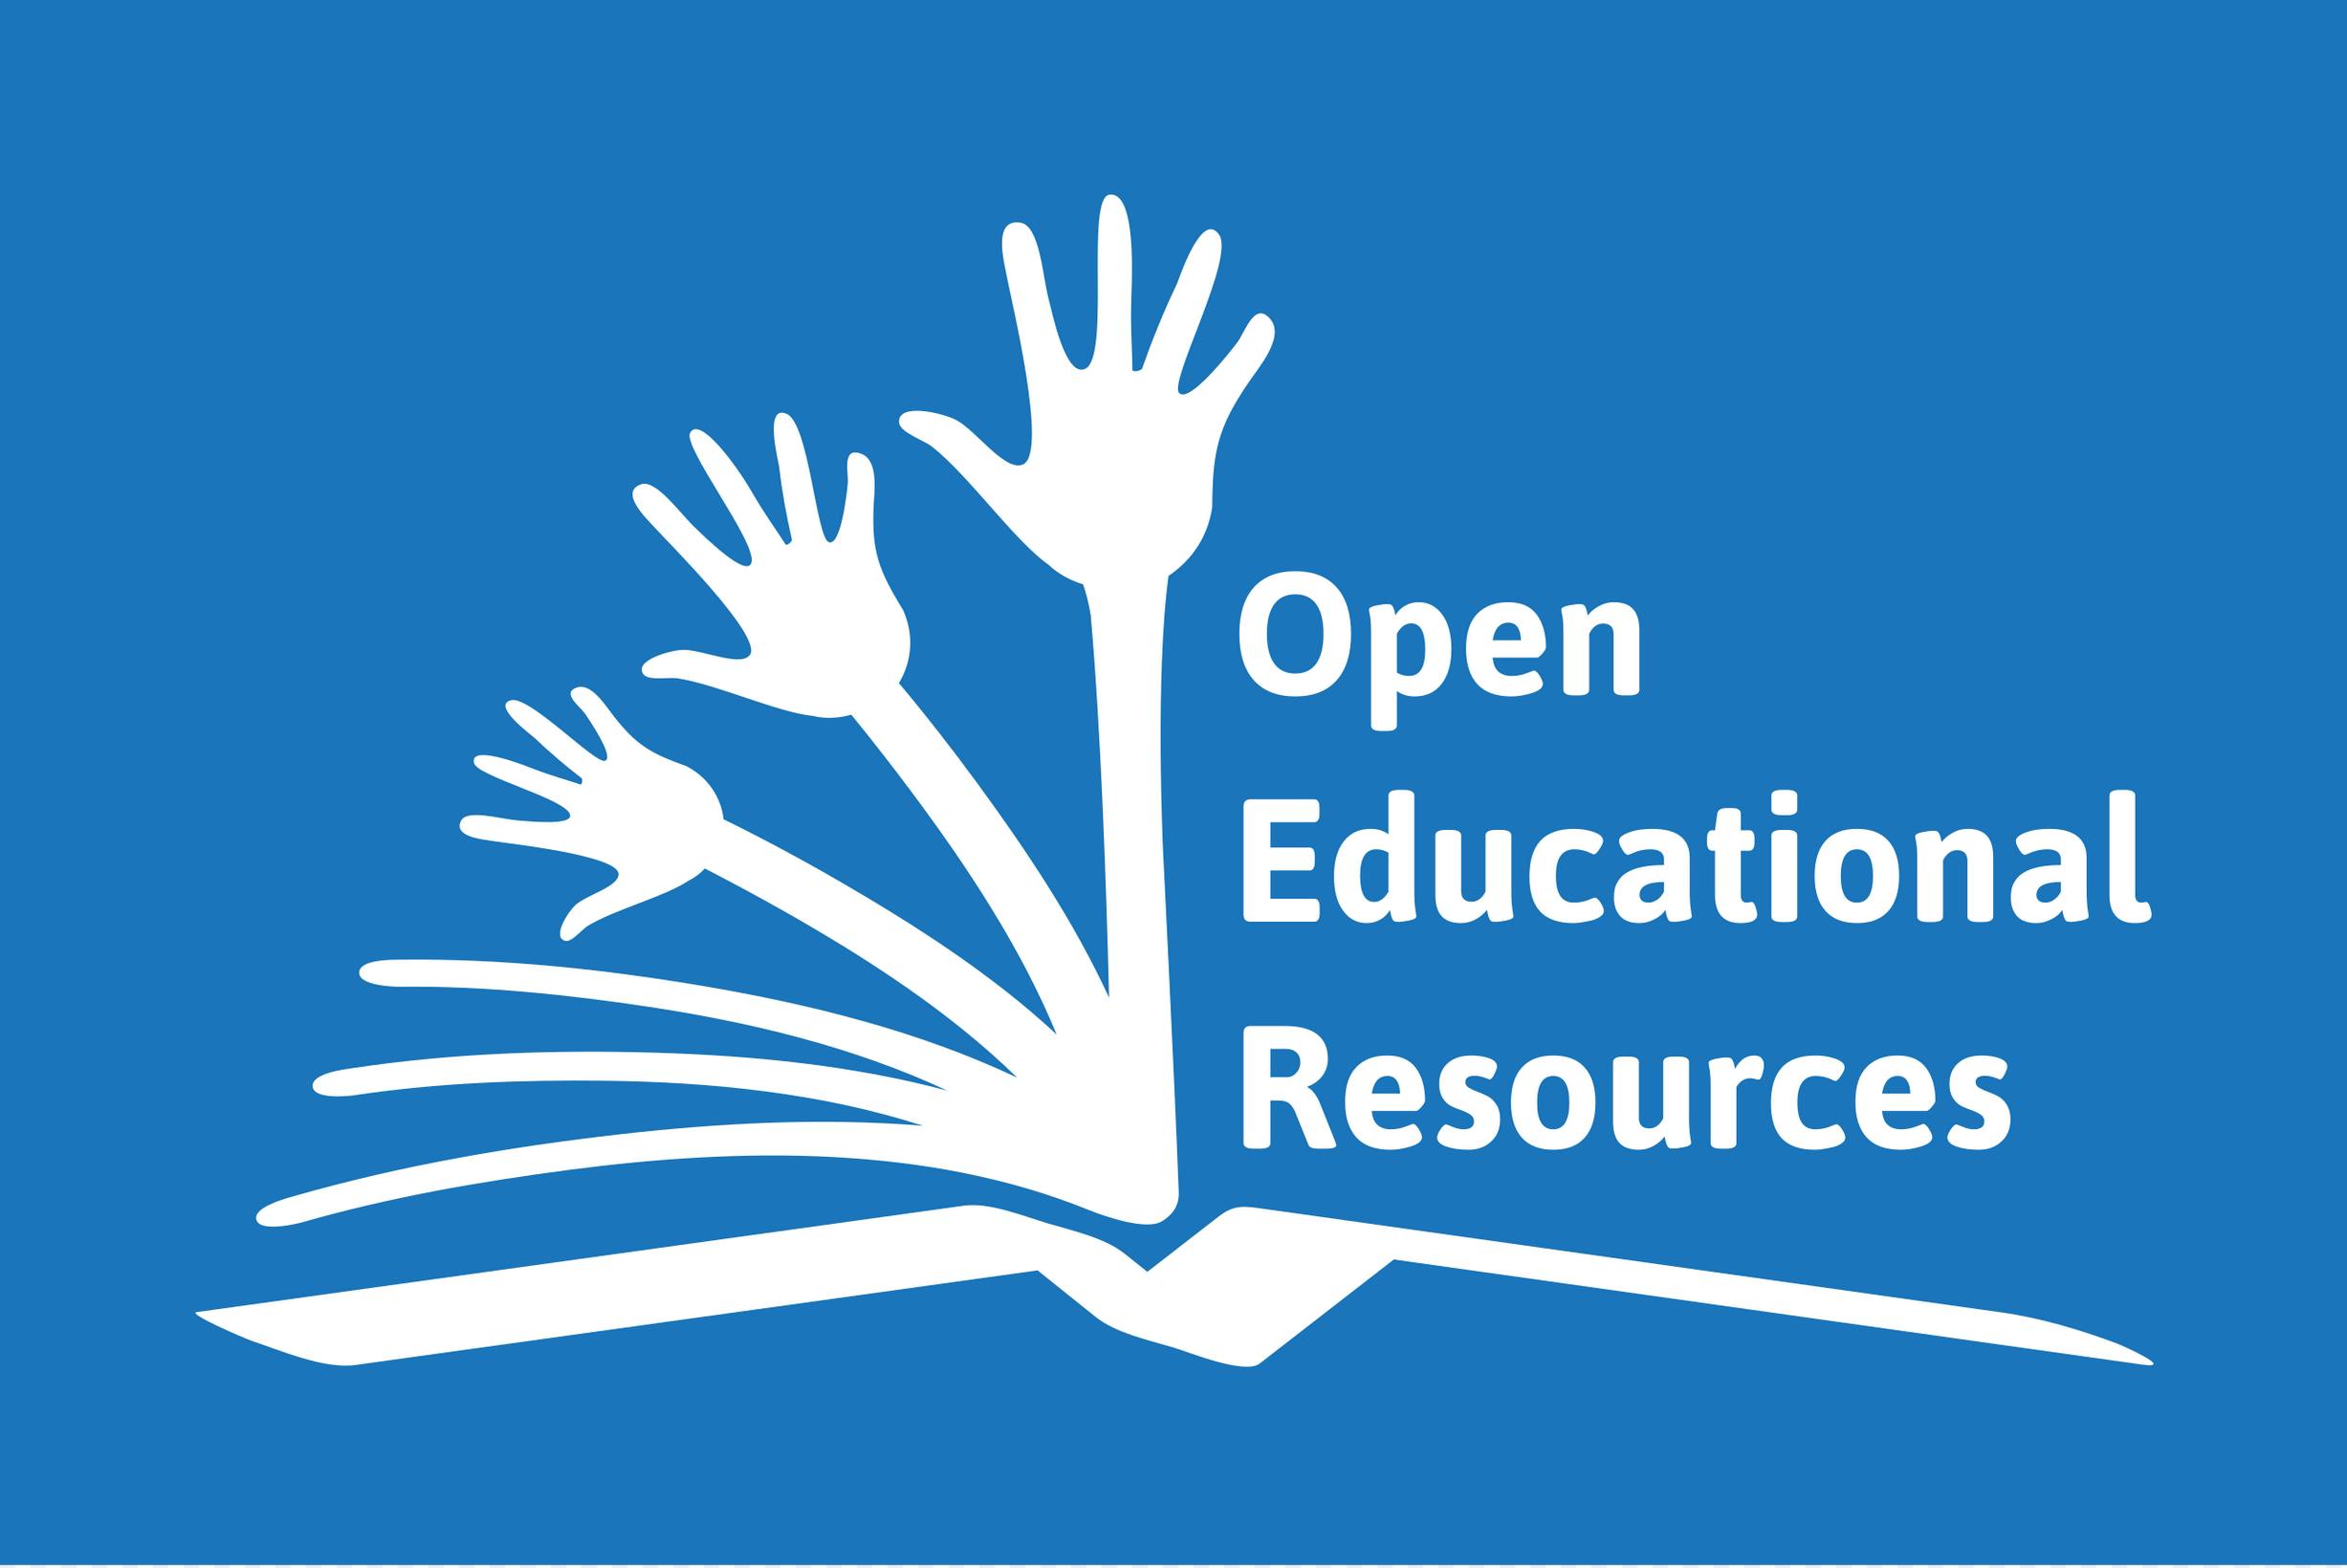 Open Educational Resources logo showing an open book